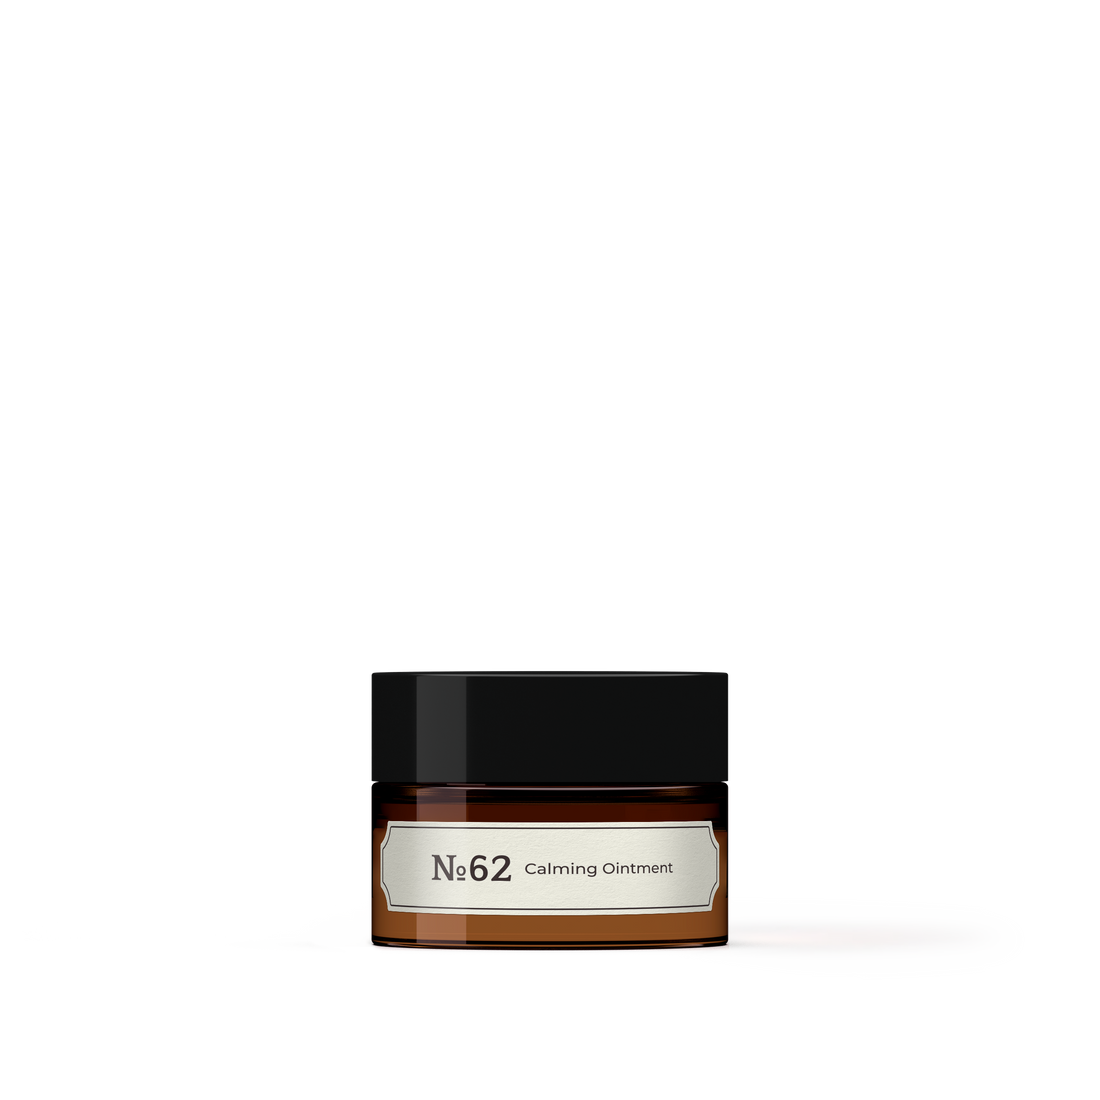 N°62 Calming Ointment